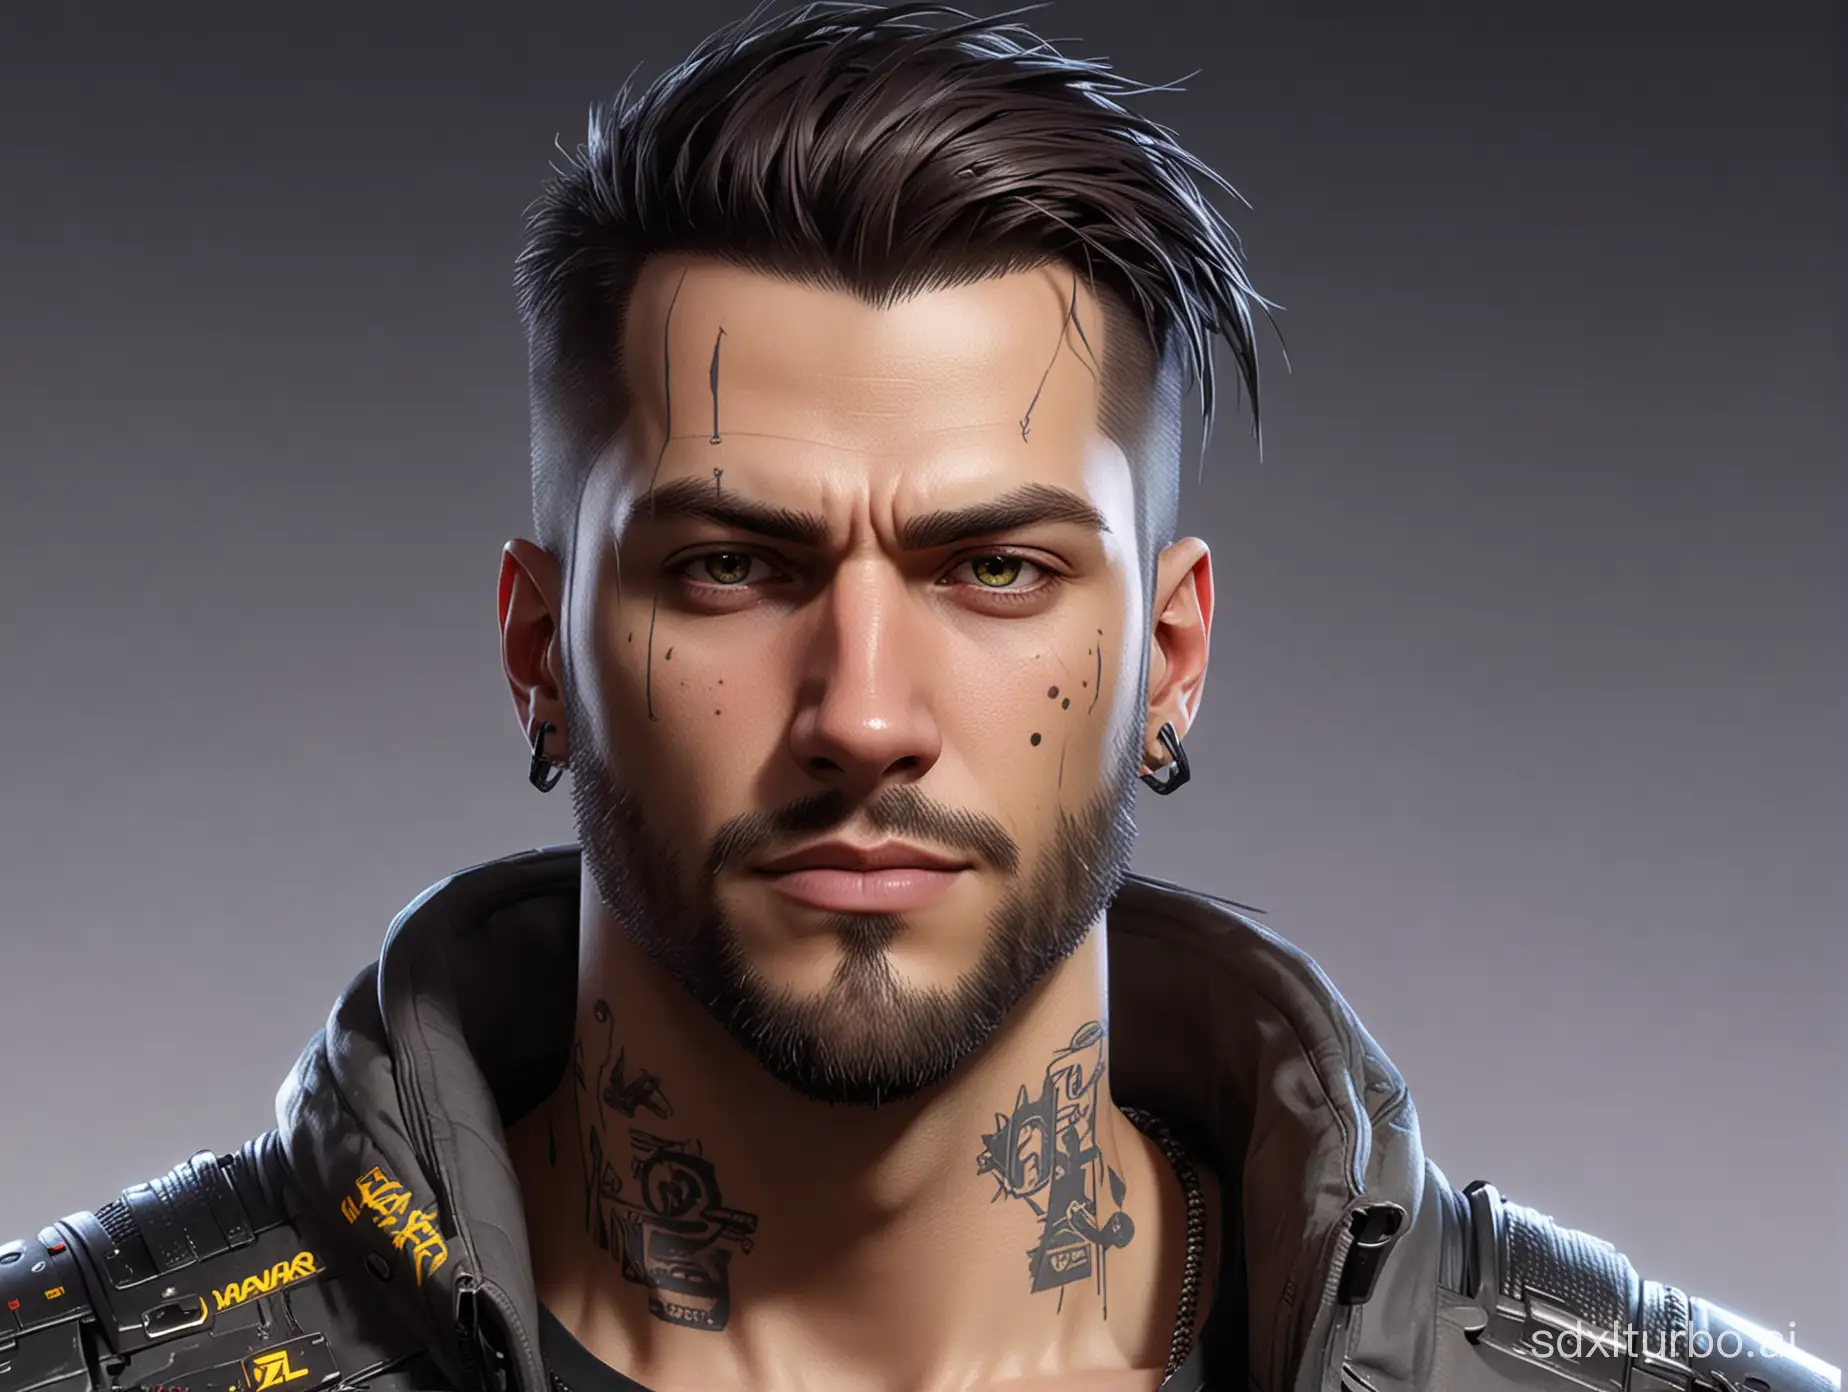 the male character from the game Cyberpunk 2077 drawn as a Pixar cartoon, professional headshot